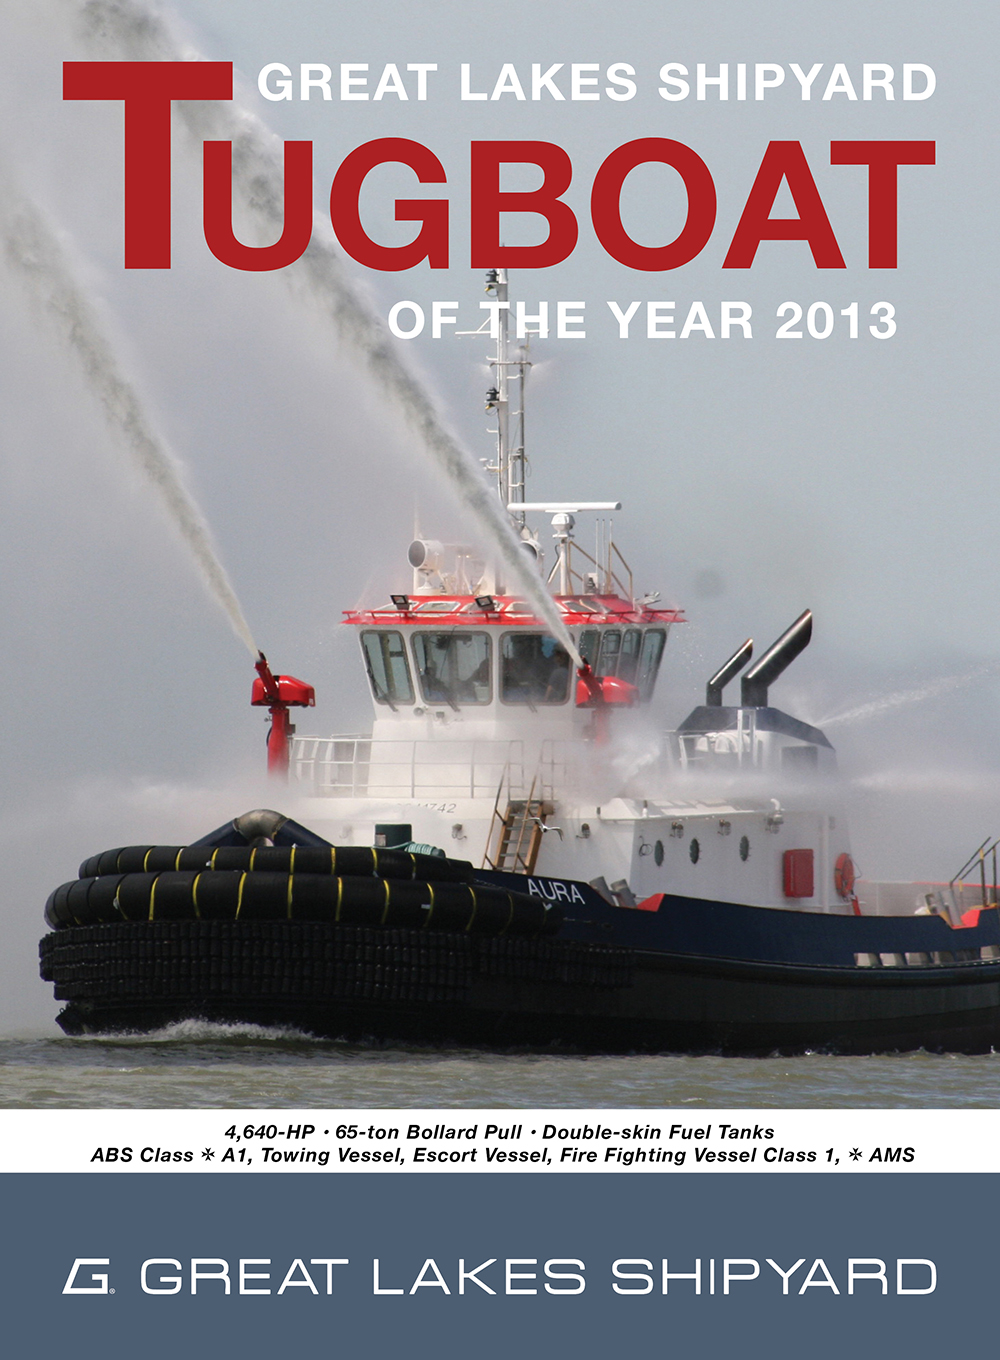 Tugboat of the Year 2013